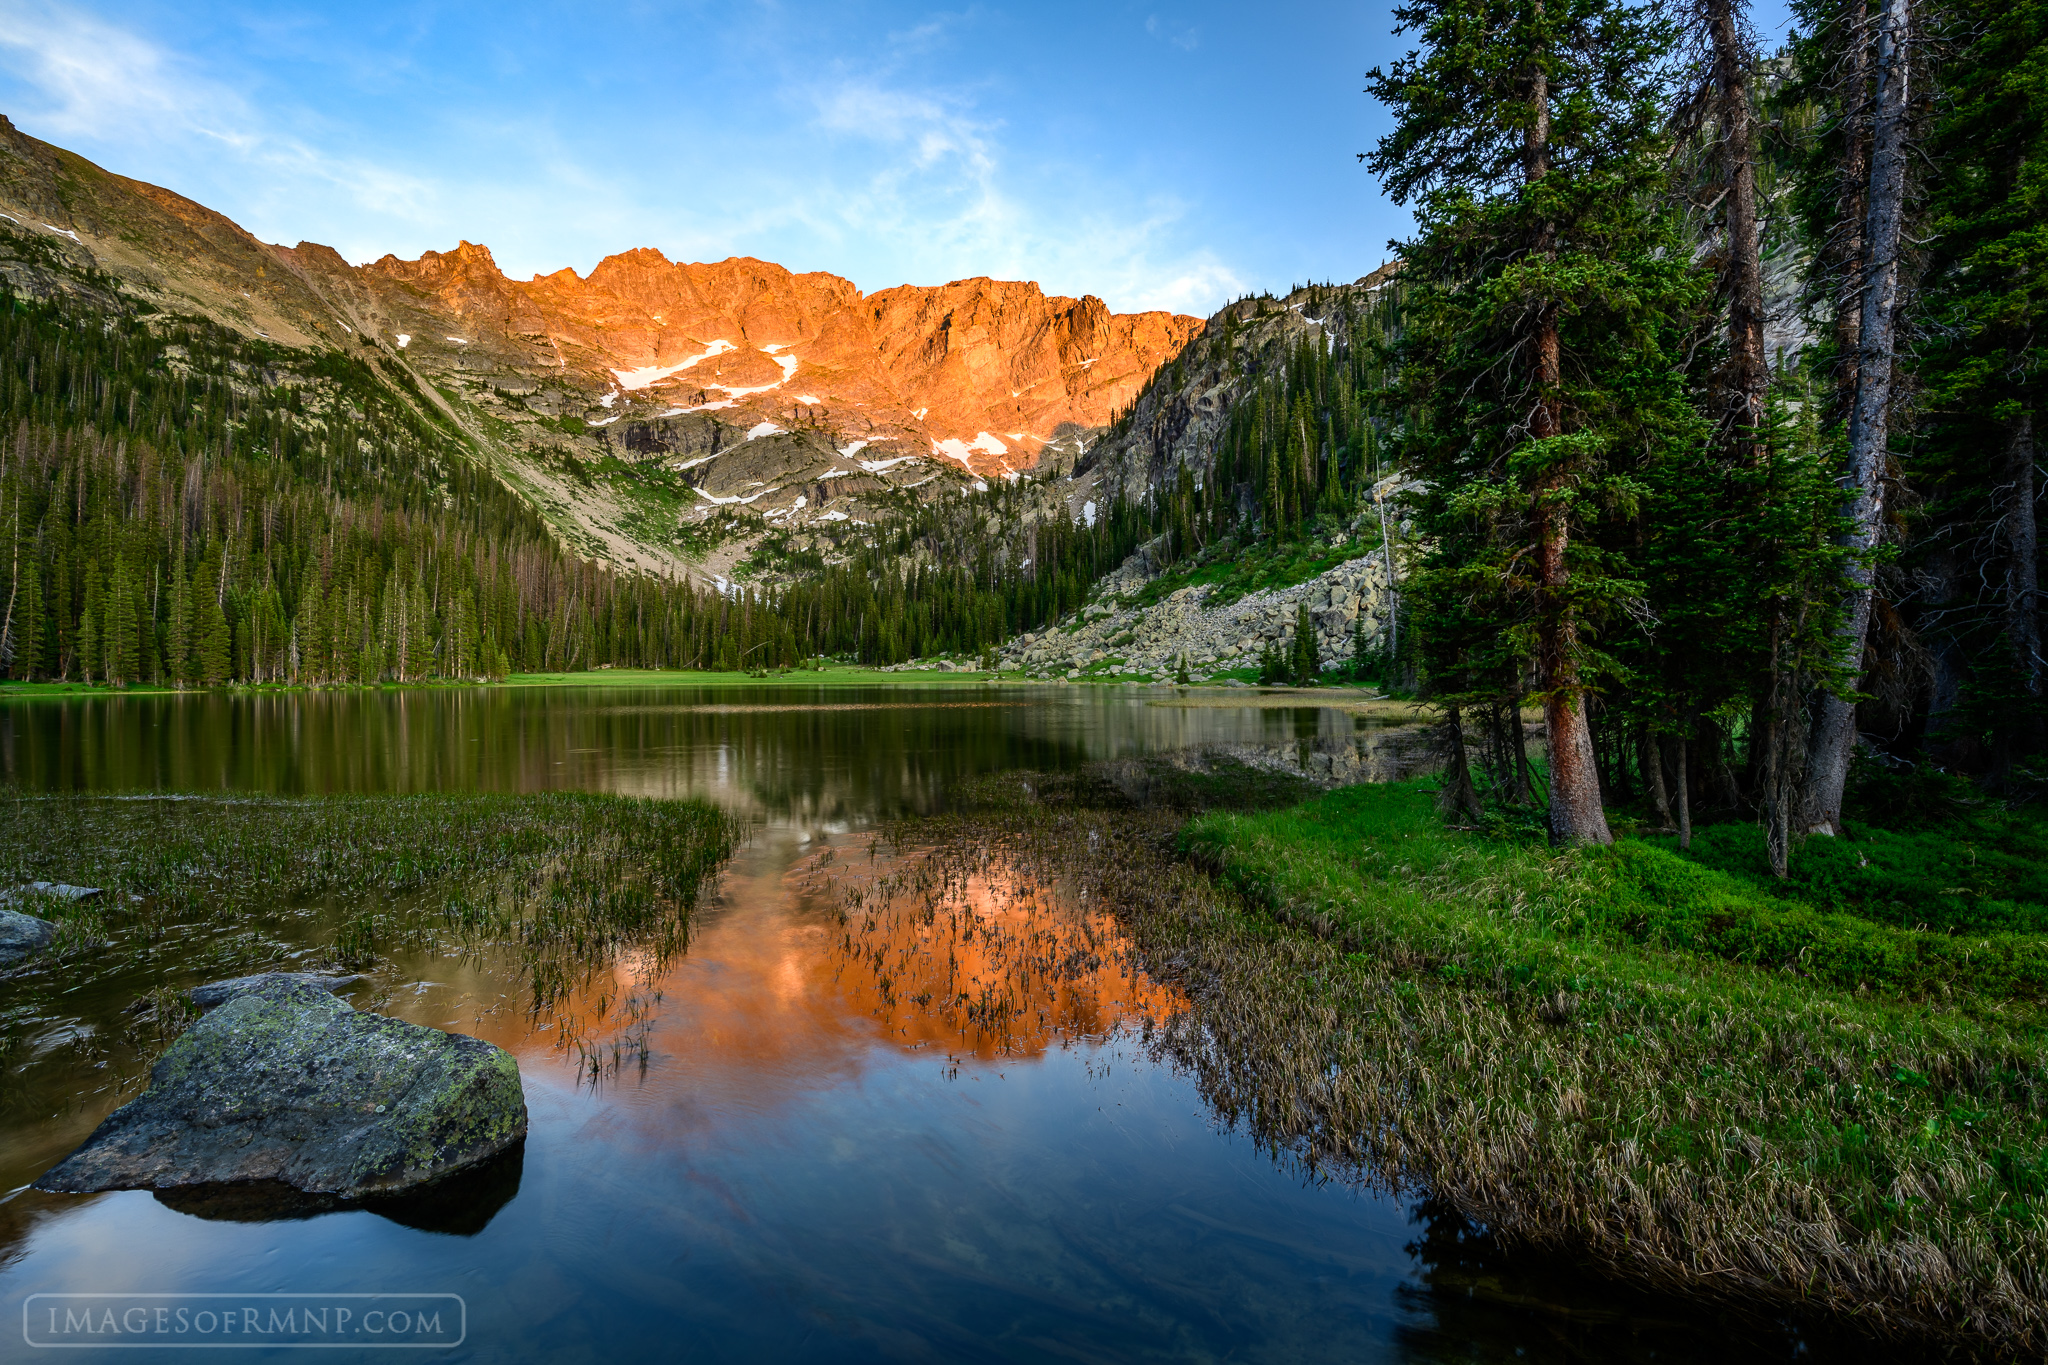 As the day comes to an end the Continental Divide glows brightly, reflecting on the outlet of a small lake in the backcountry...